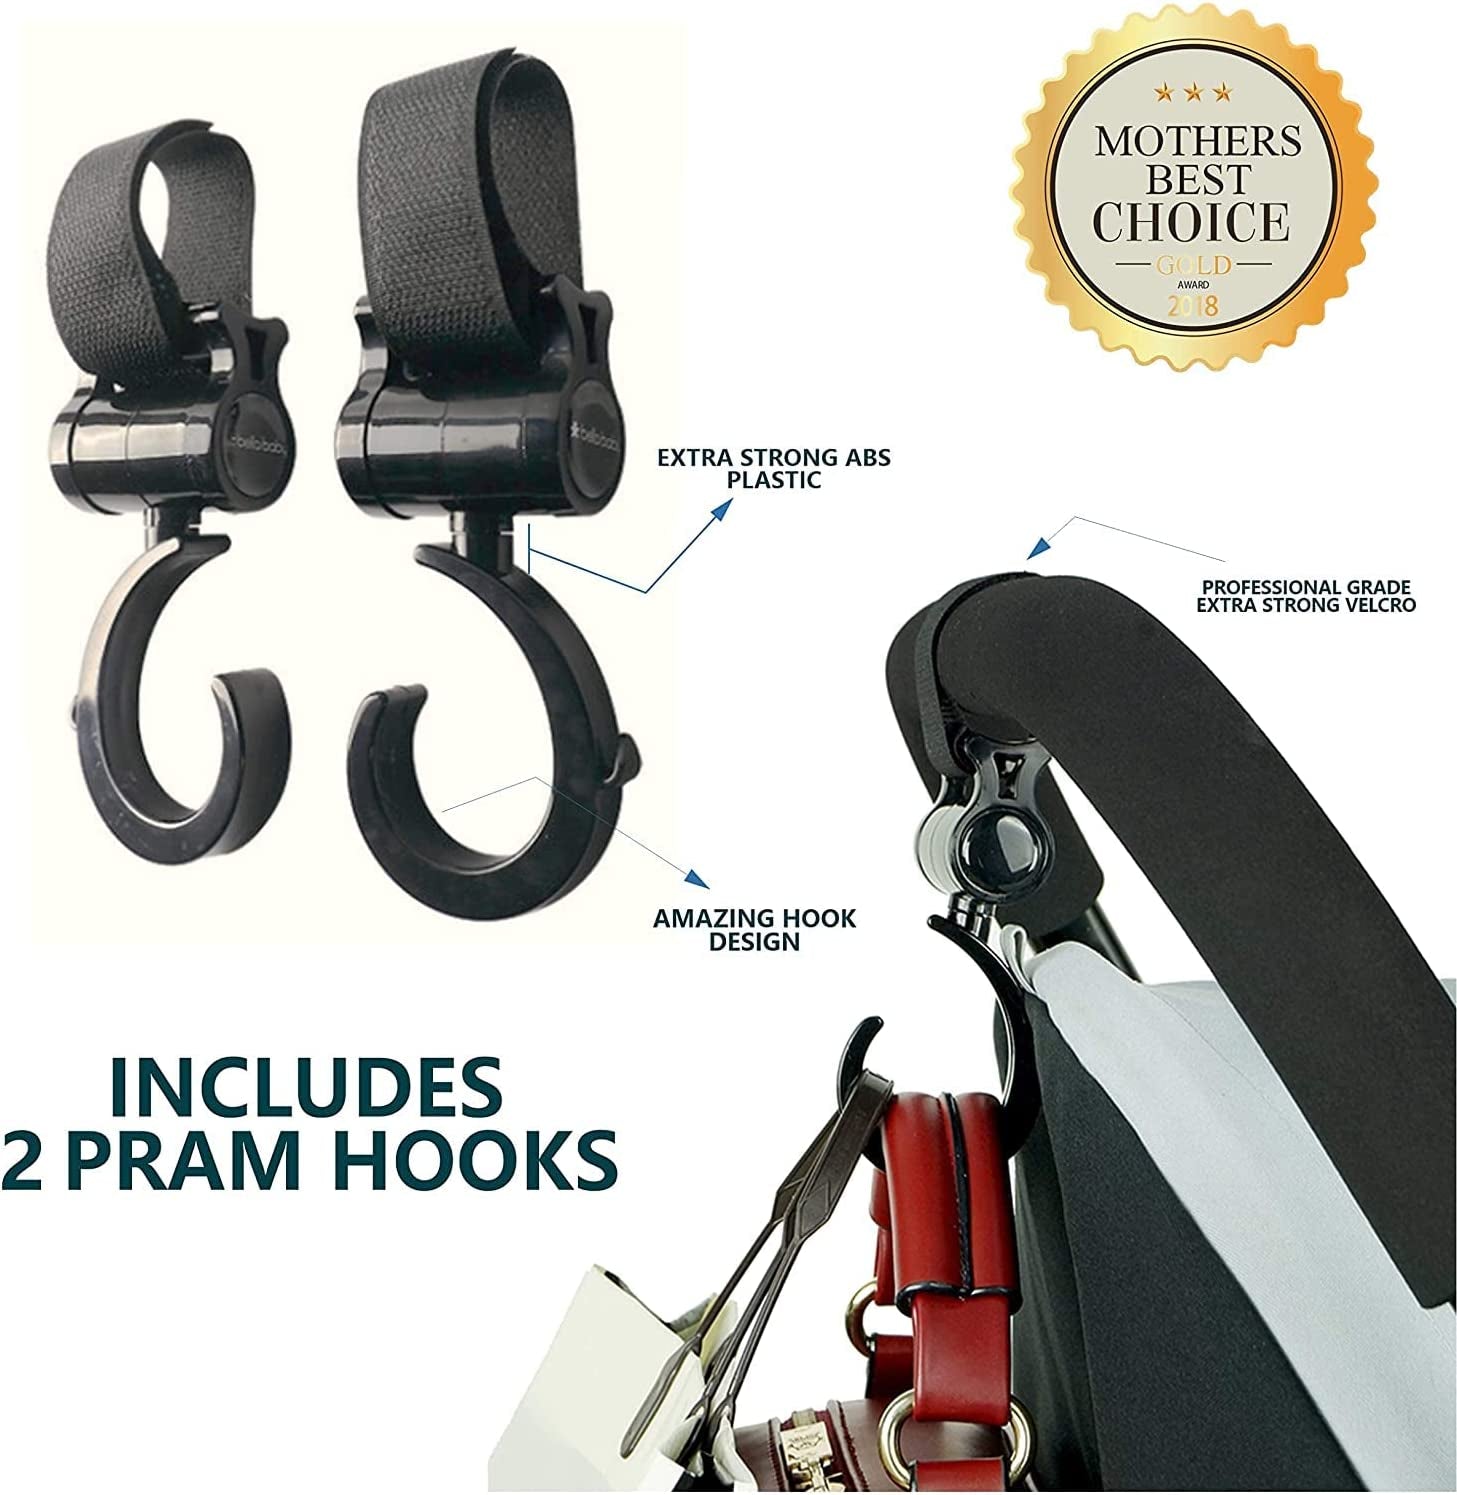 Pram Cup Holder, Pushchair/Stroller Cup Holder, Universal Baby Bottle Pram Organiser, Drink and Coffee Cup Holder, with 2 Pram Hooks, Can Be Used for Baby Buggy, Bike and Wheelchair